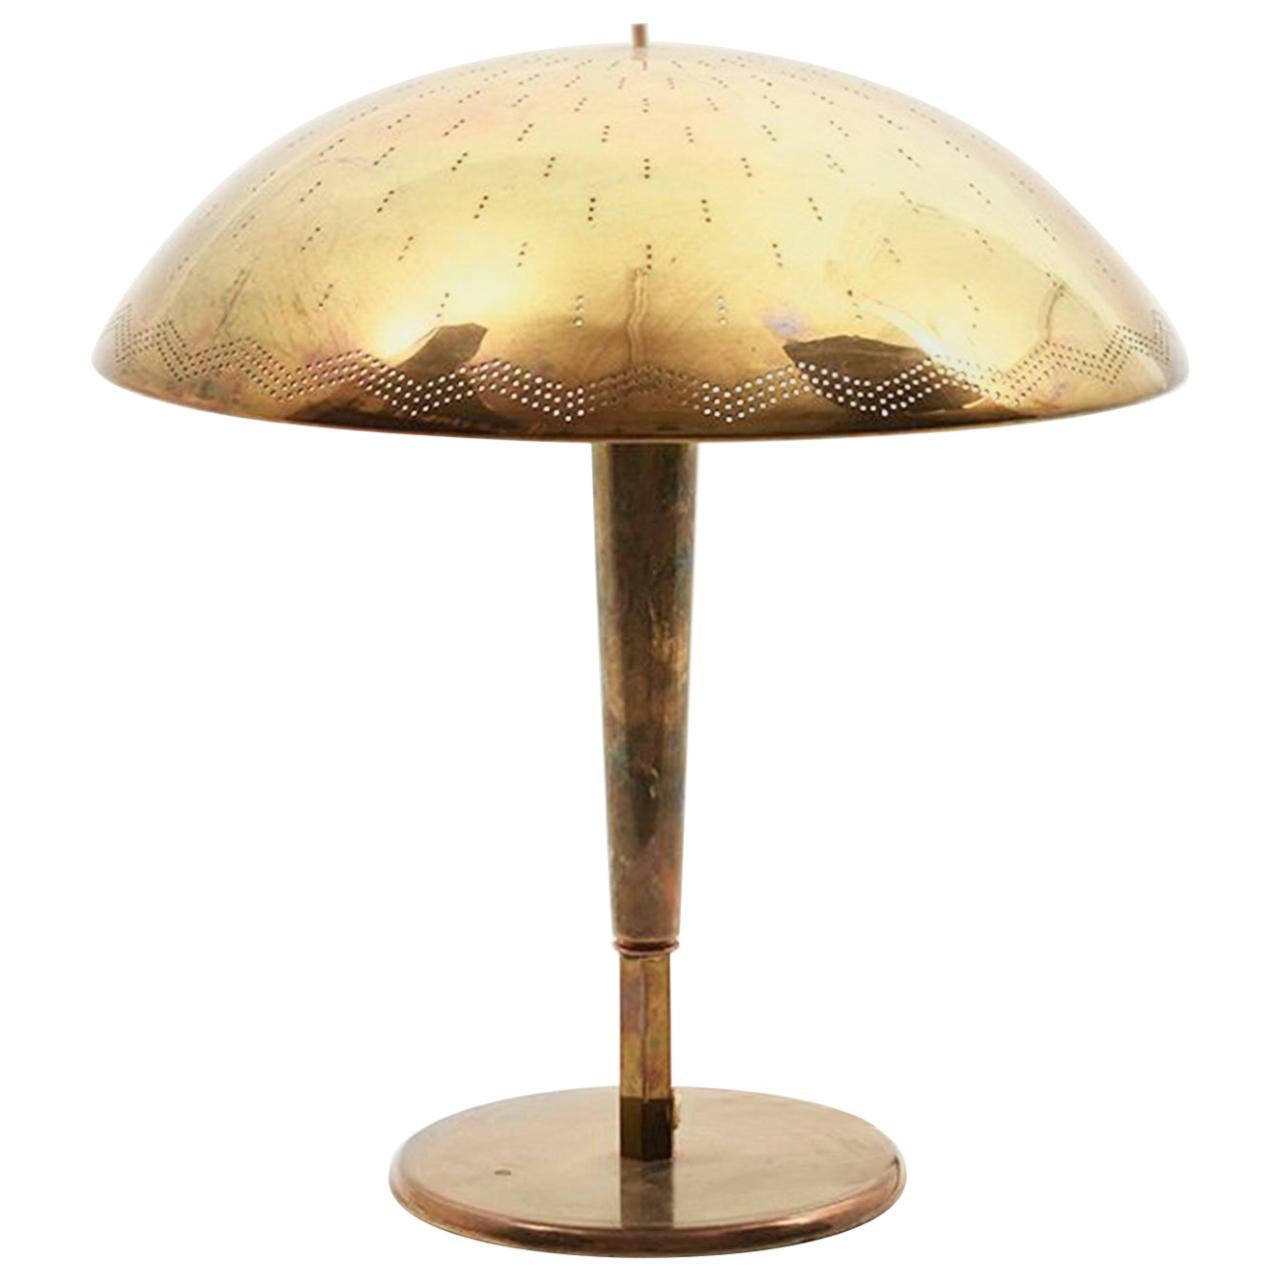 Paavo Tynell Table Lamp Model “Umbrella” Manufactured by Taito Oy Finland, 1940